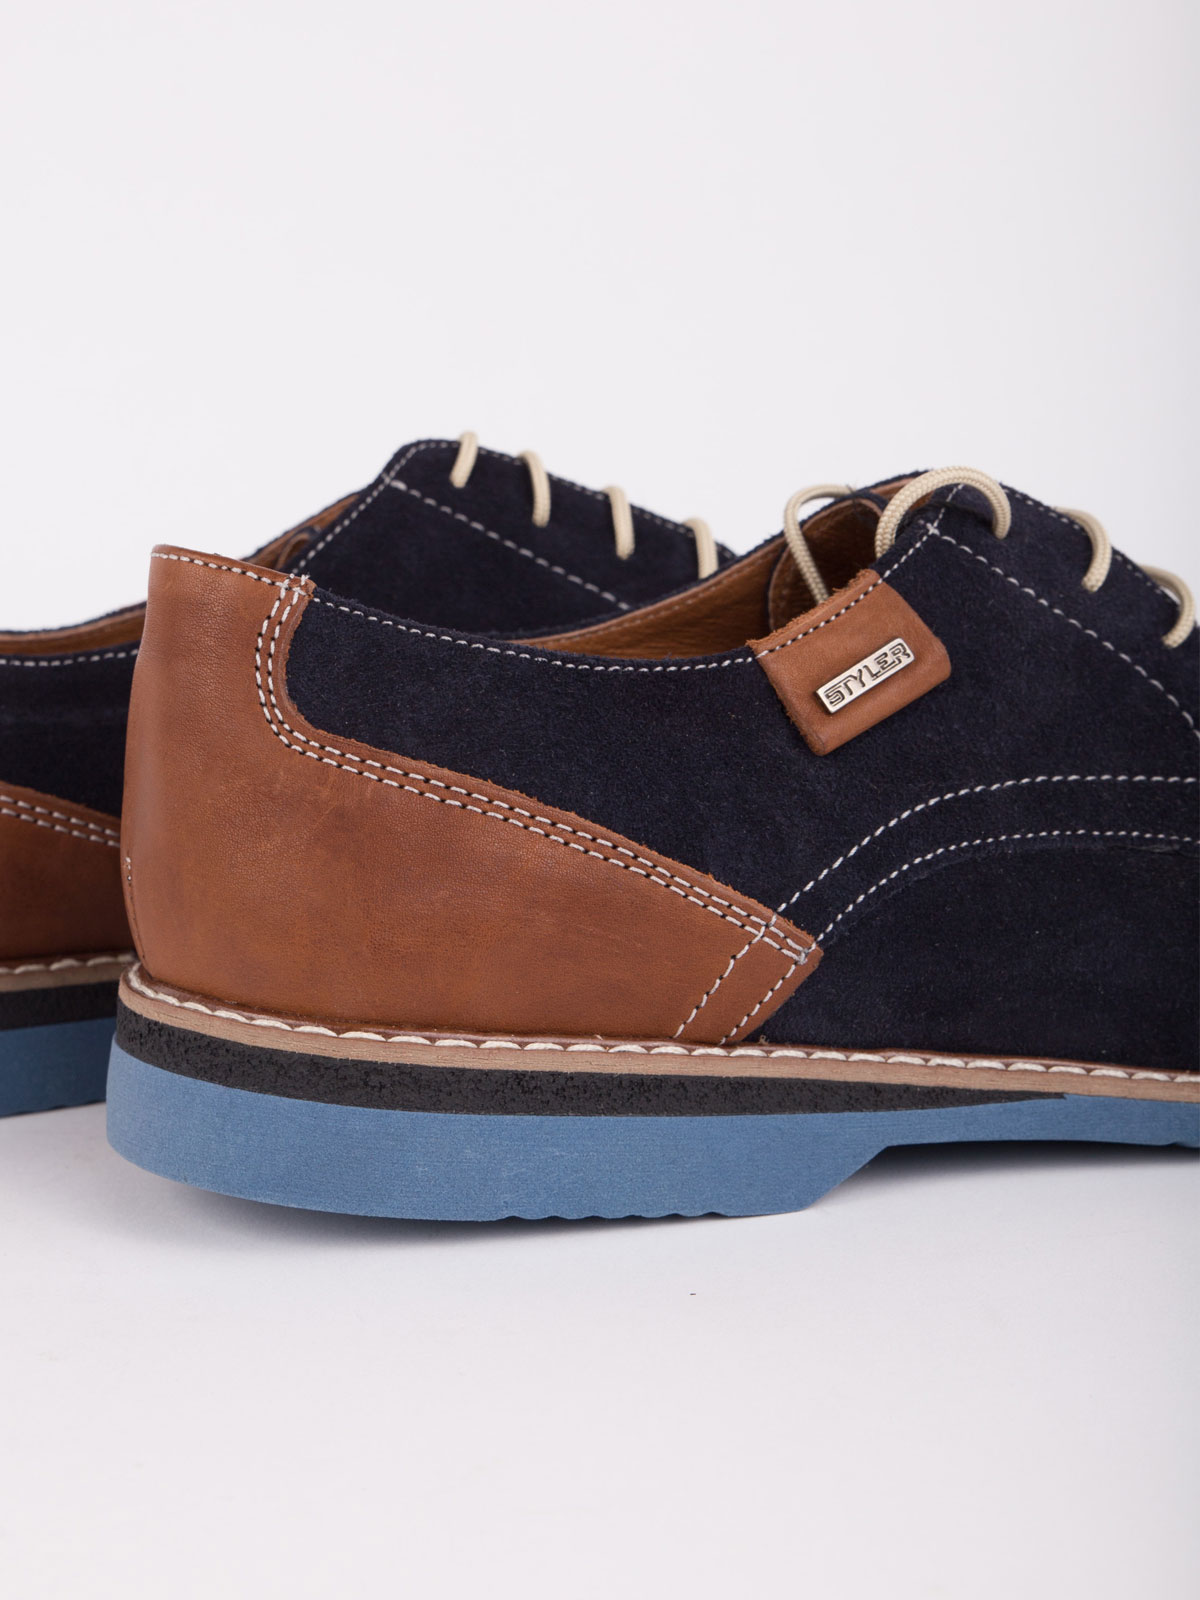 Mens suede and leather shoes - 81078 - € 83.24 img2